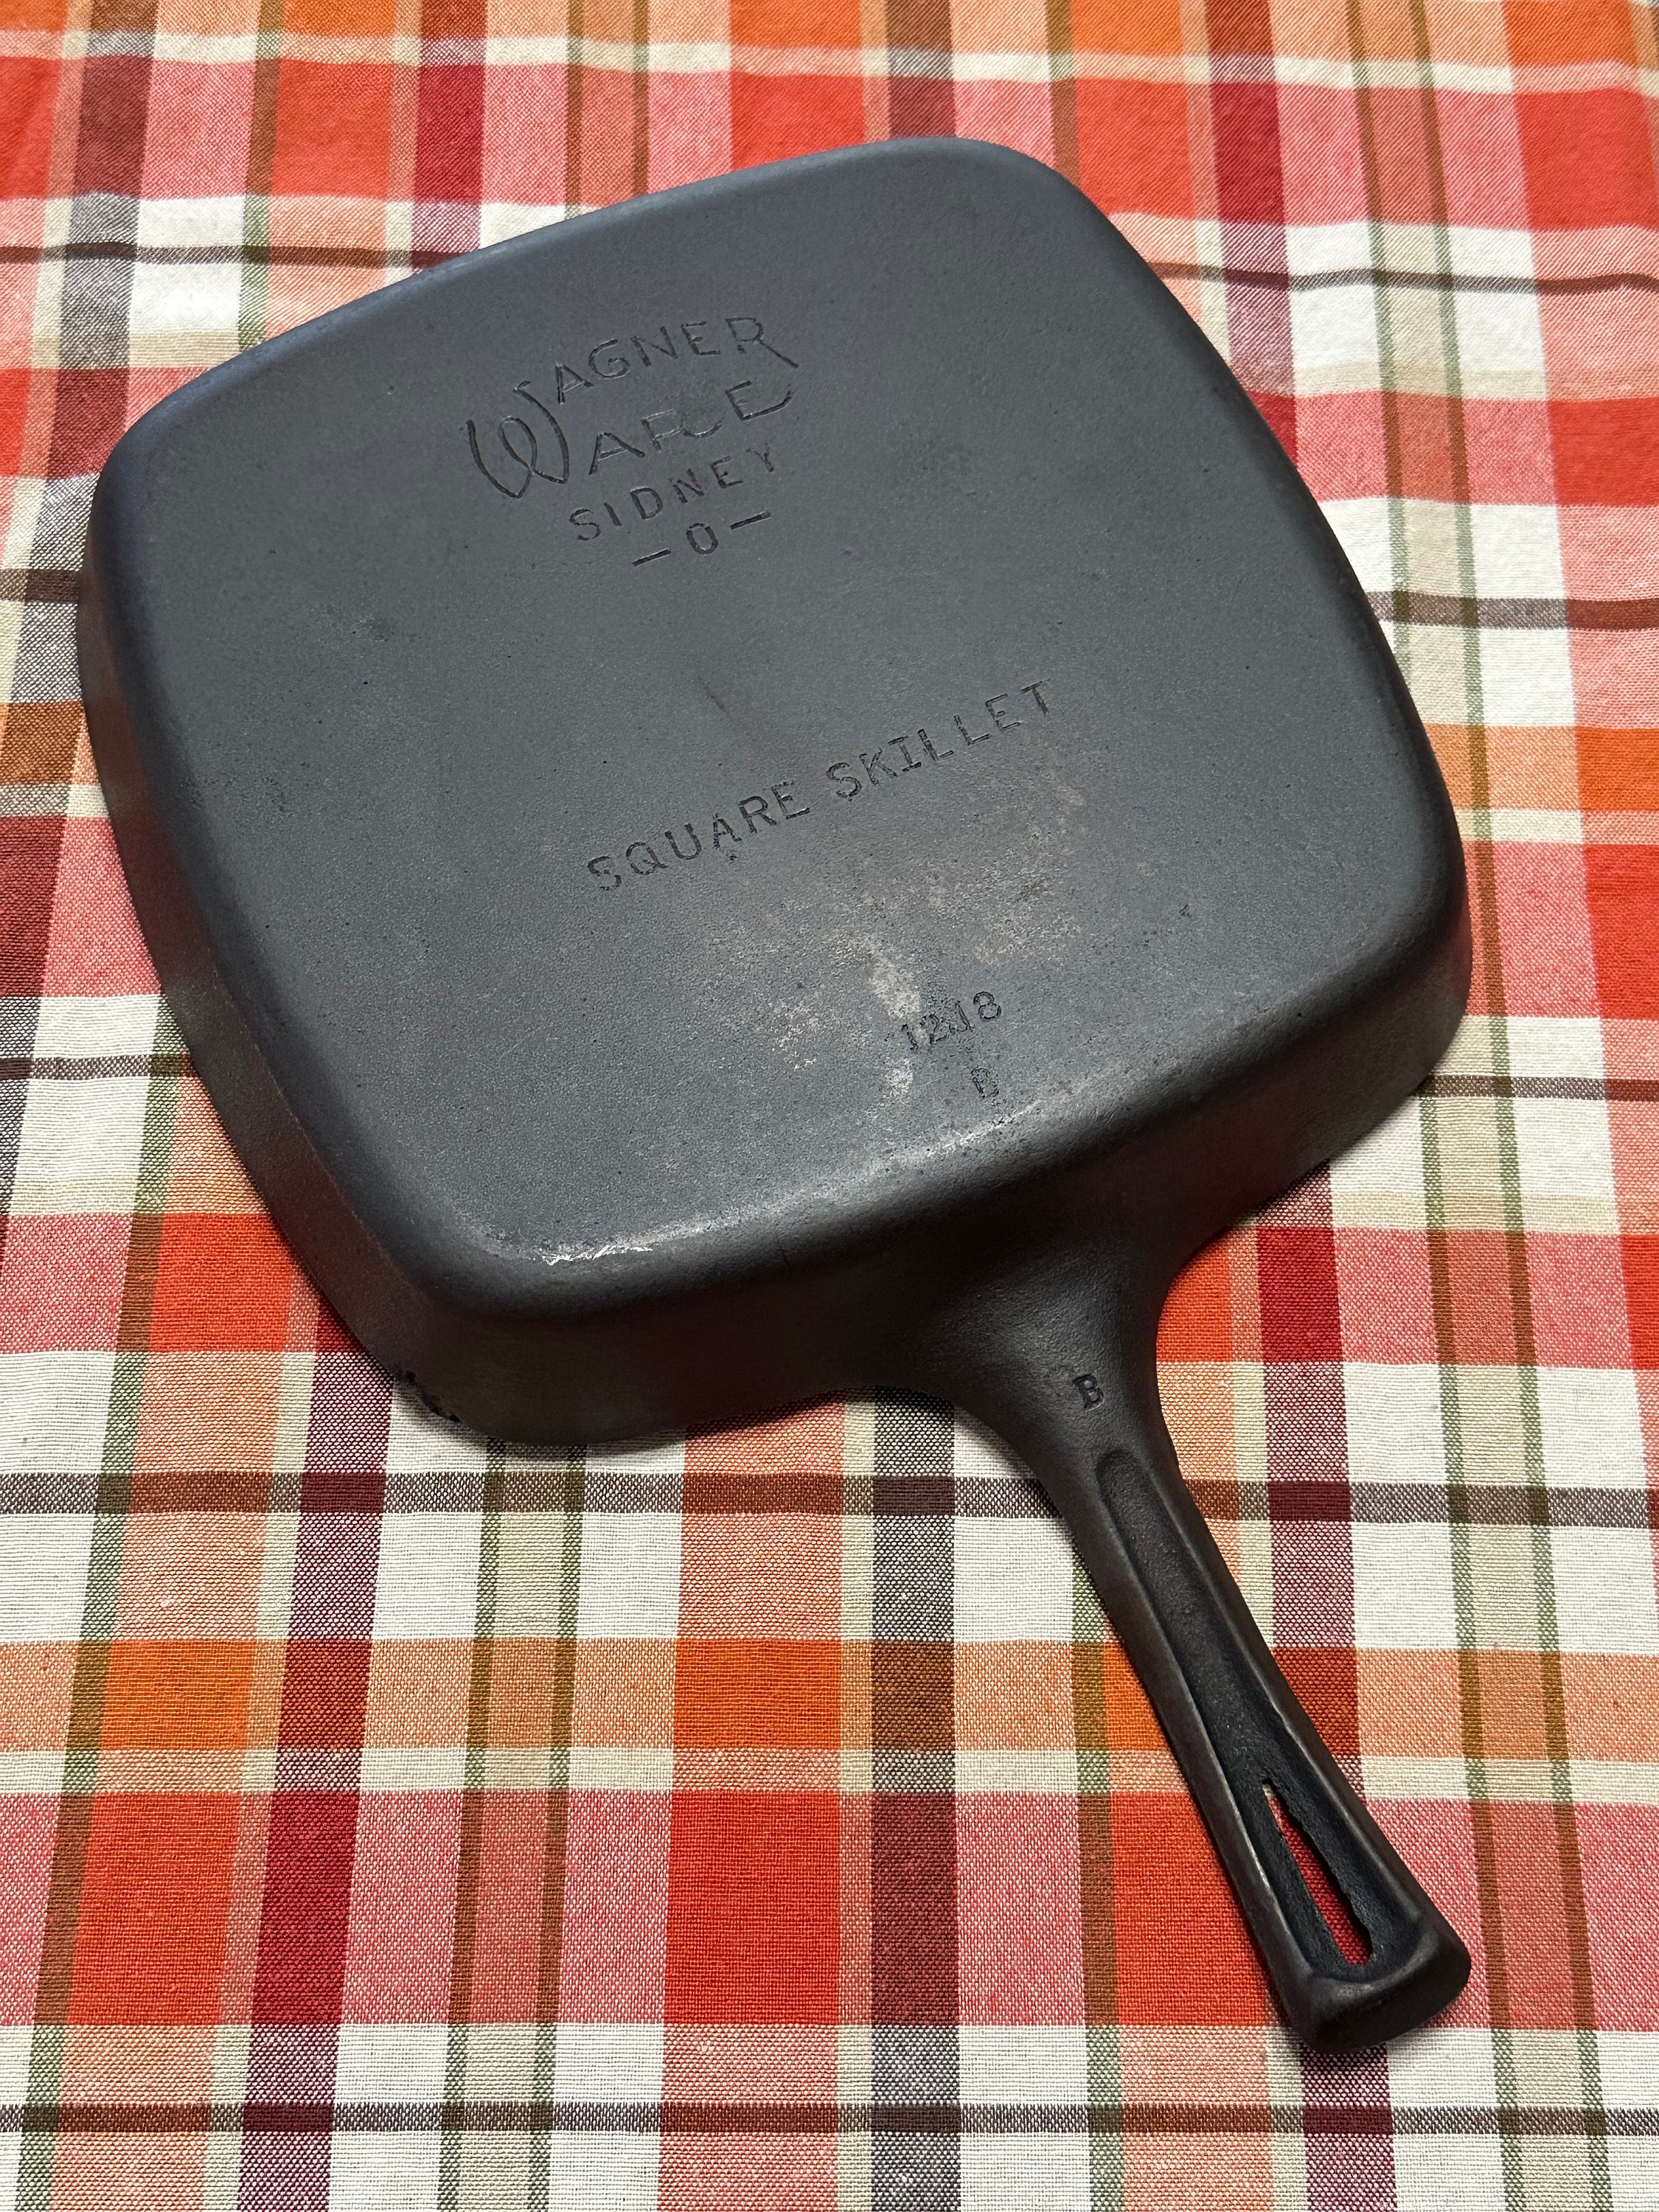 Vintage Cast Iron Square Skillet 101/4 Used heavy Duty No Brand Name